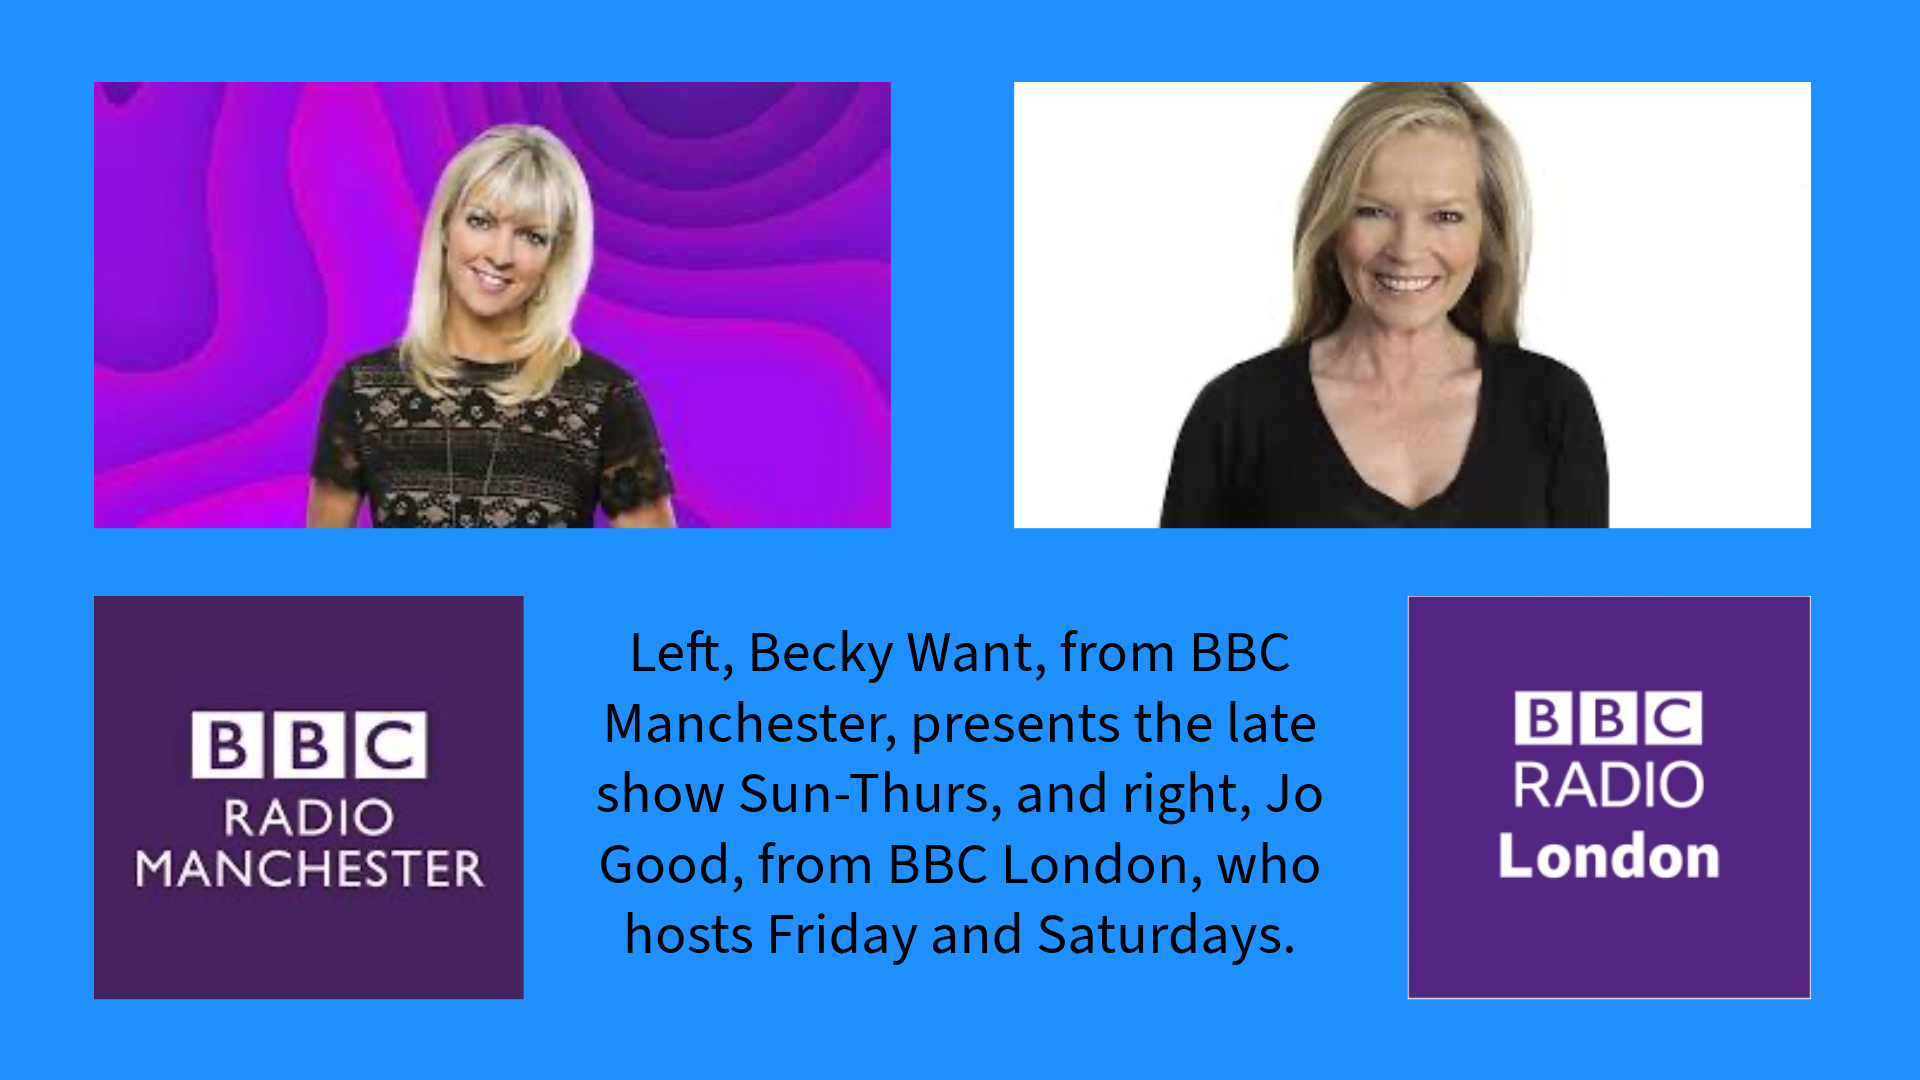 Presenters Becky Want and Jo Good